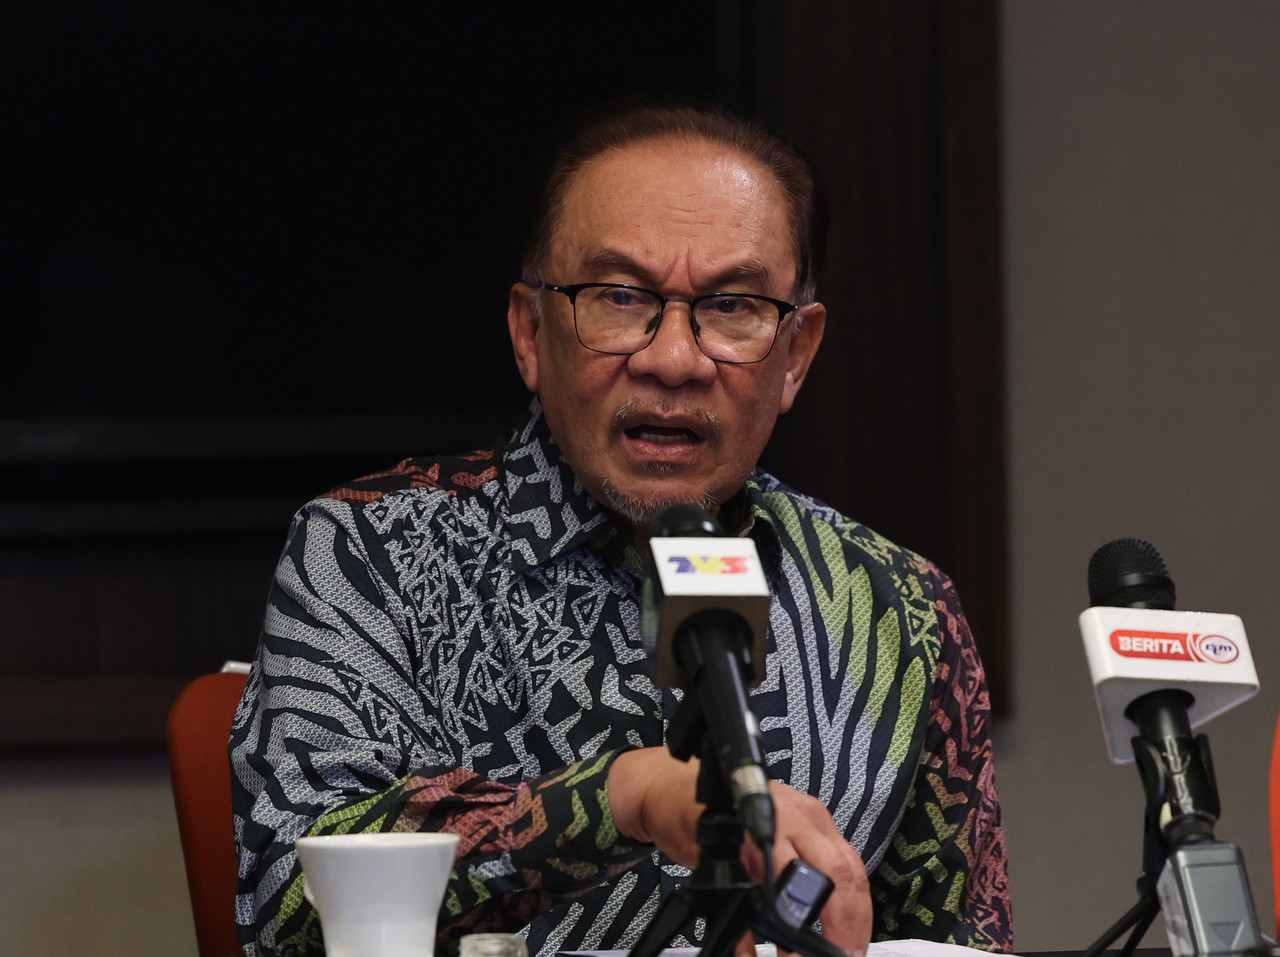 Anwar ‘quite happy’ with Apec outcomes, but rues lack of consensus on Gaza ceasefire